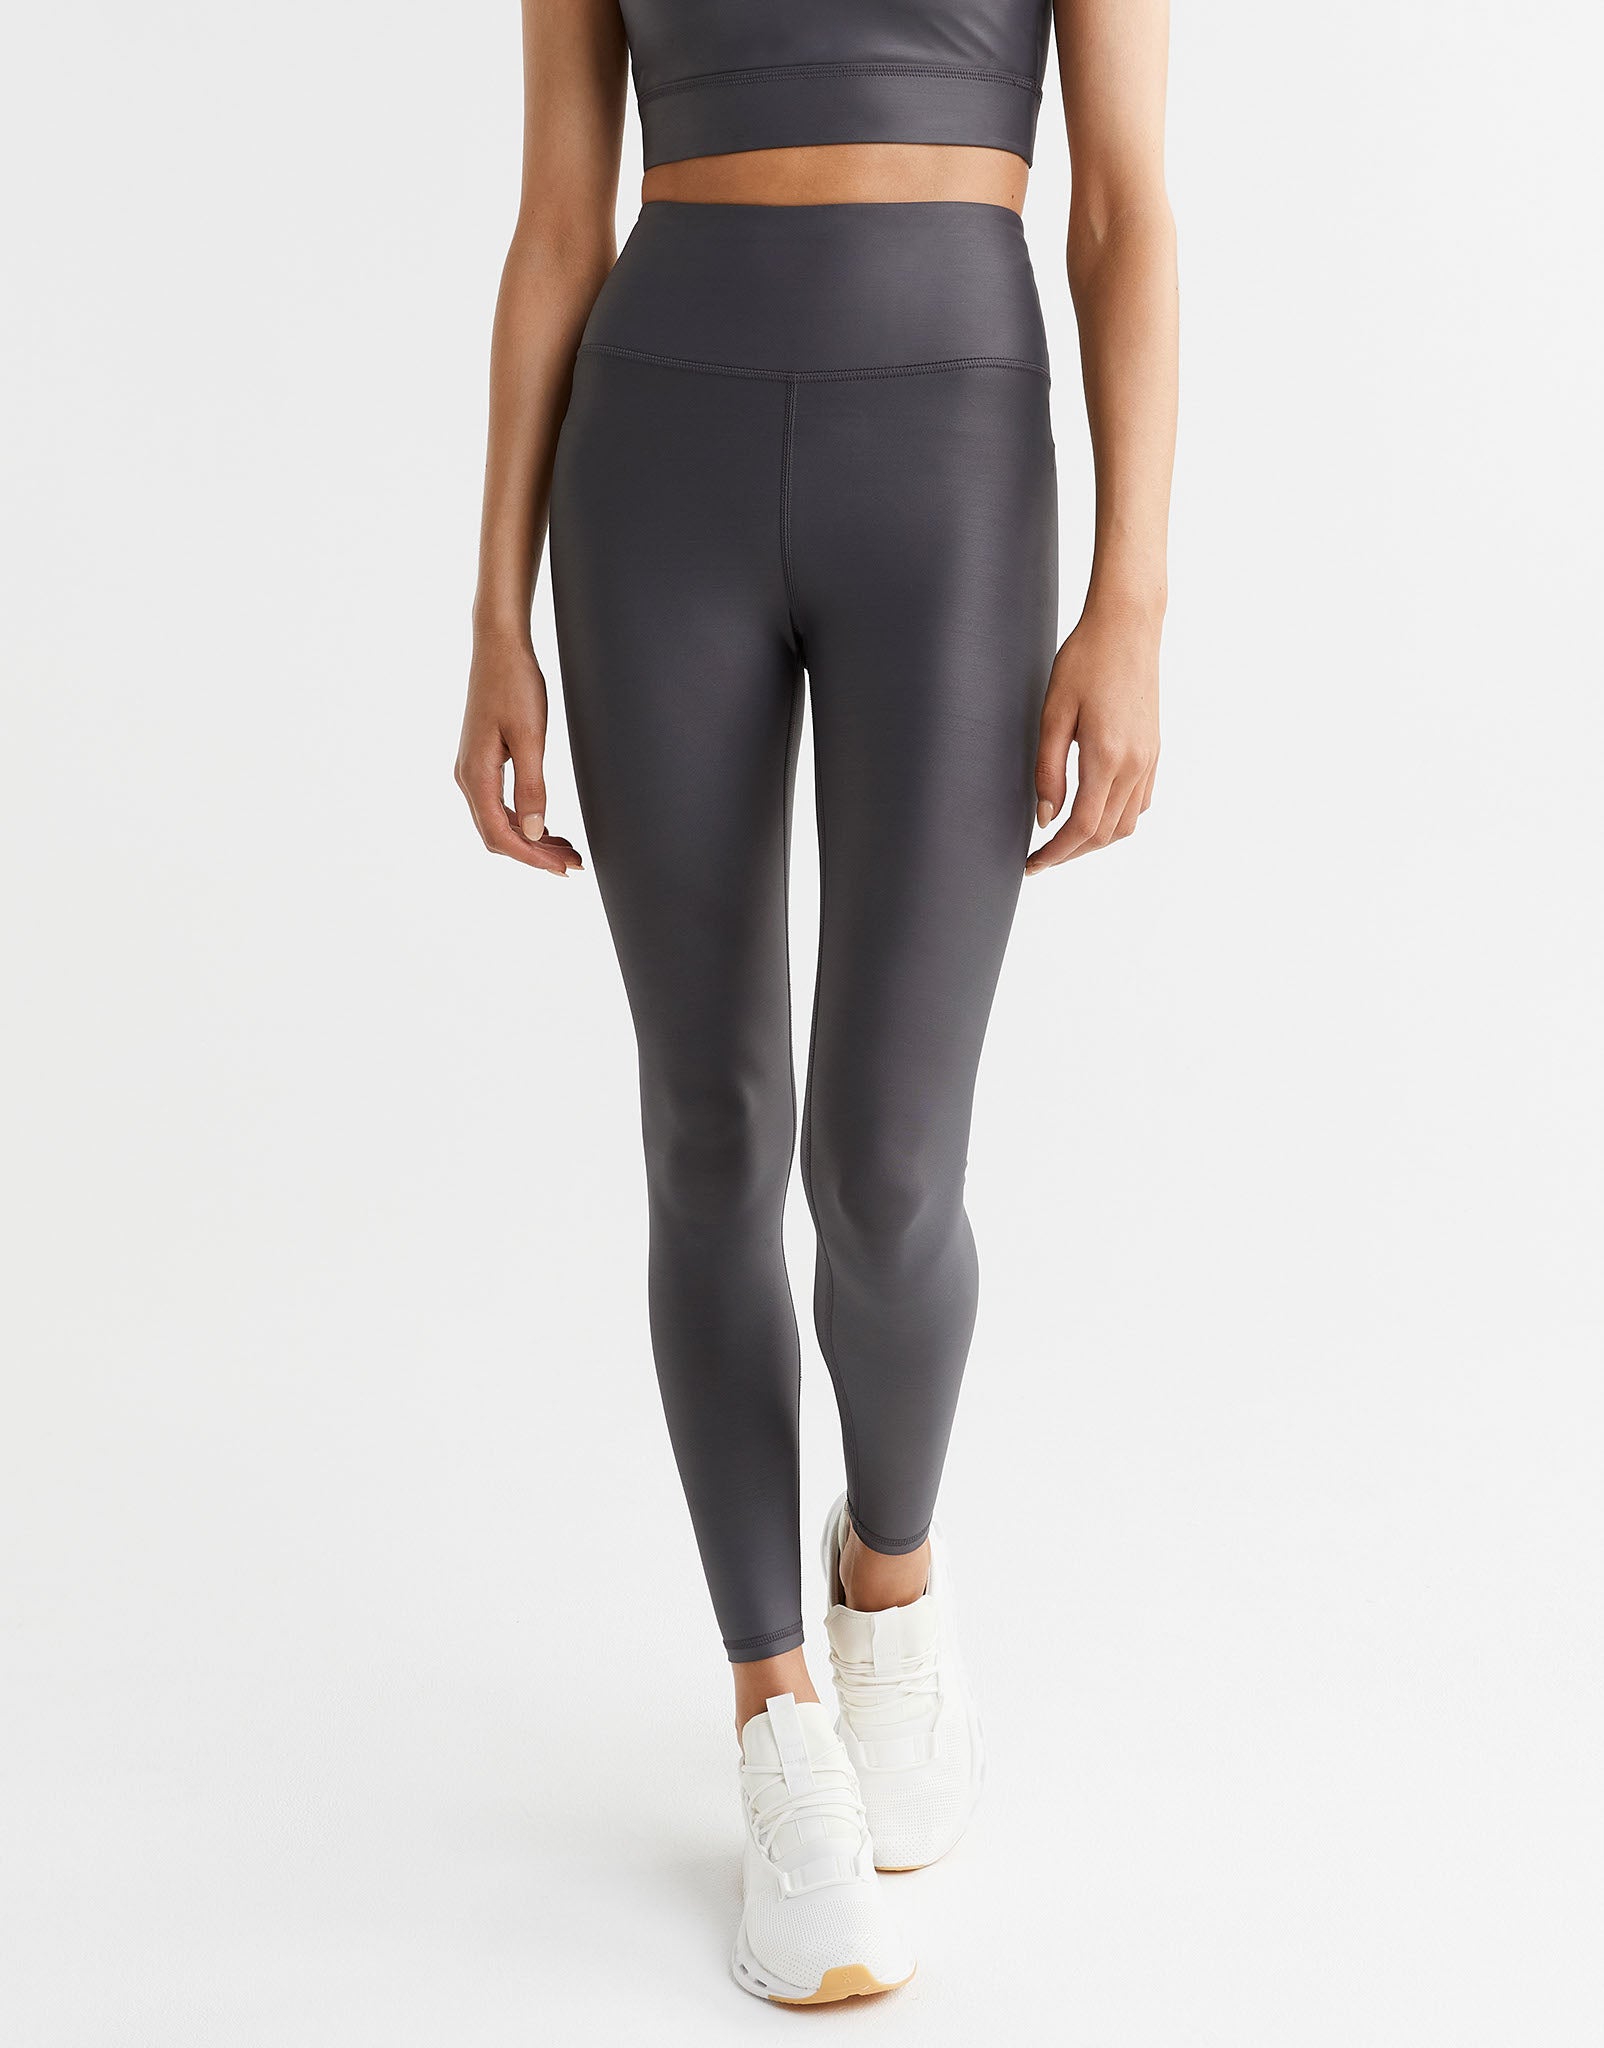 Lilybod-Storm-Legging-Mineral-All-Over-Wet-Look-LL125-MWL-3.jpeg